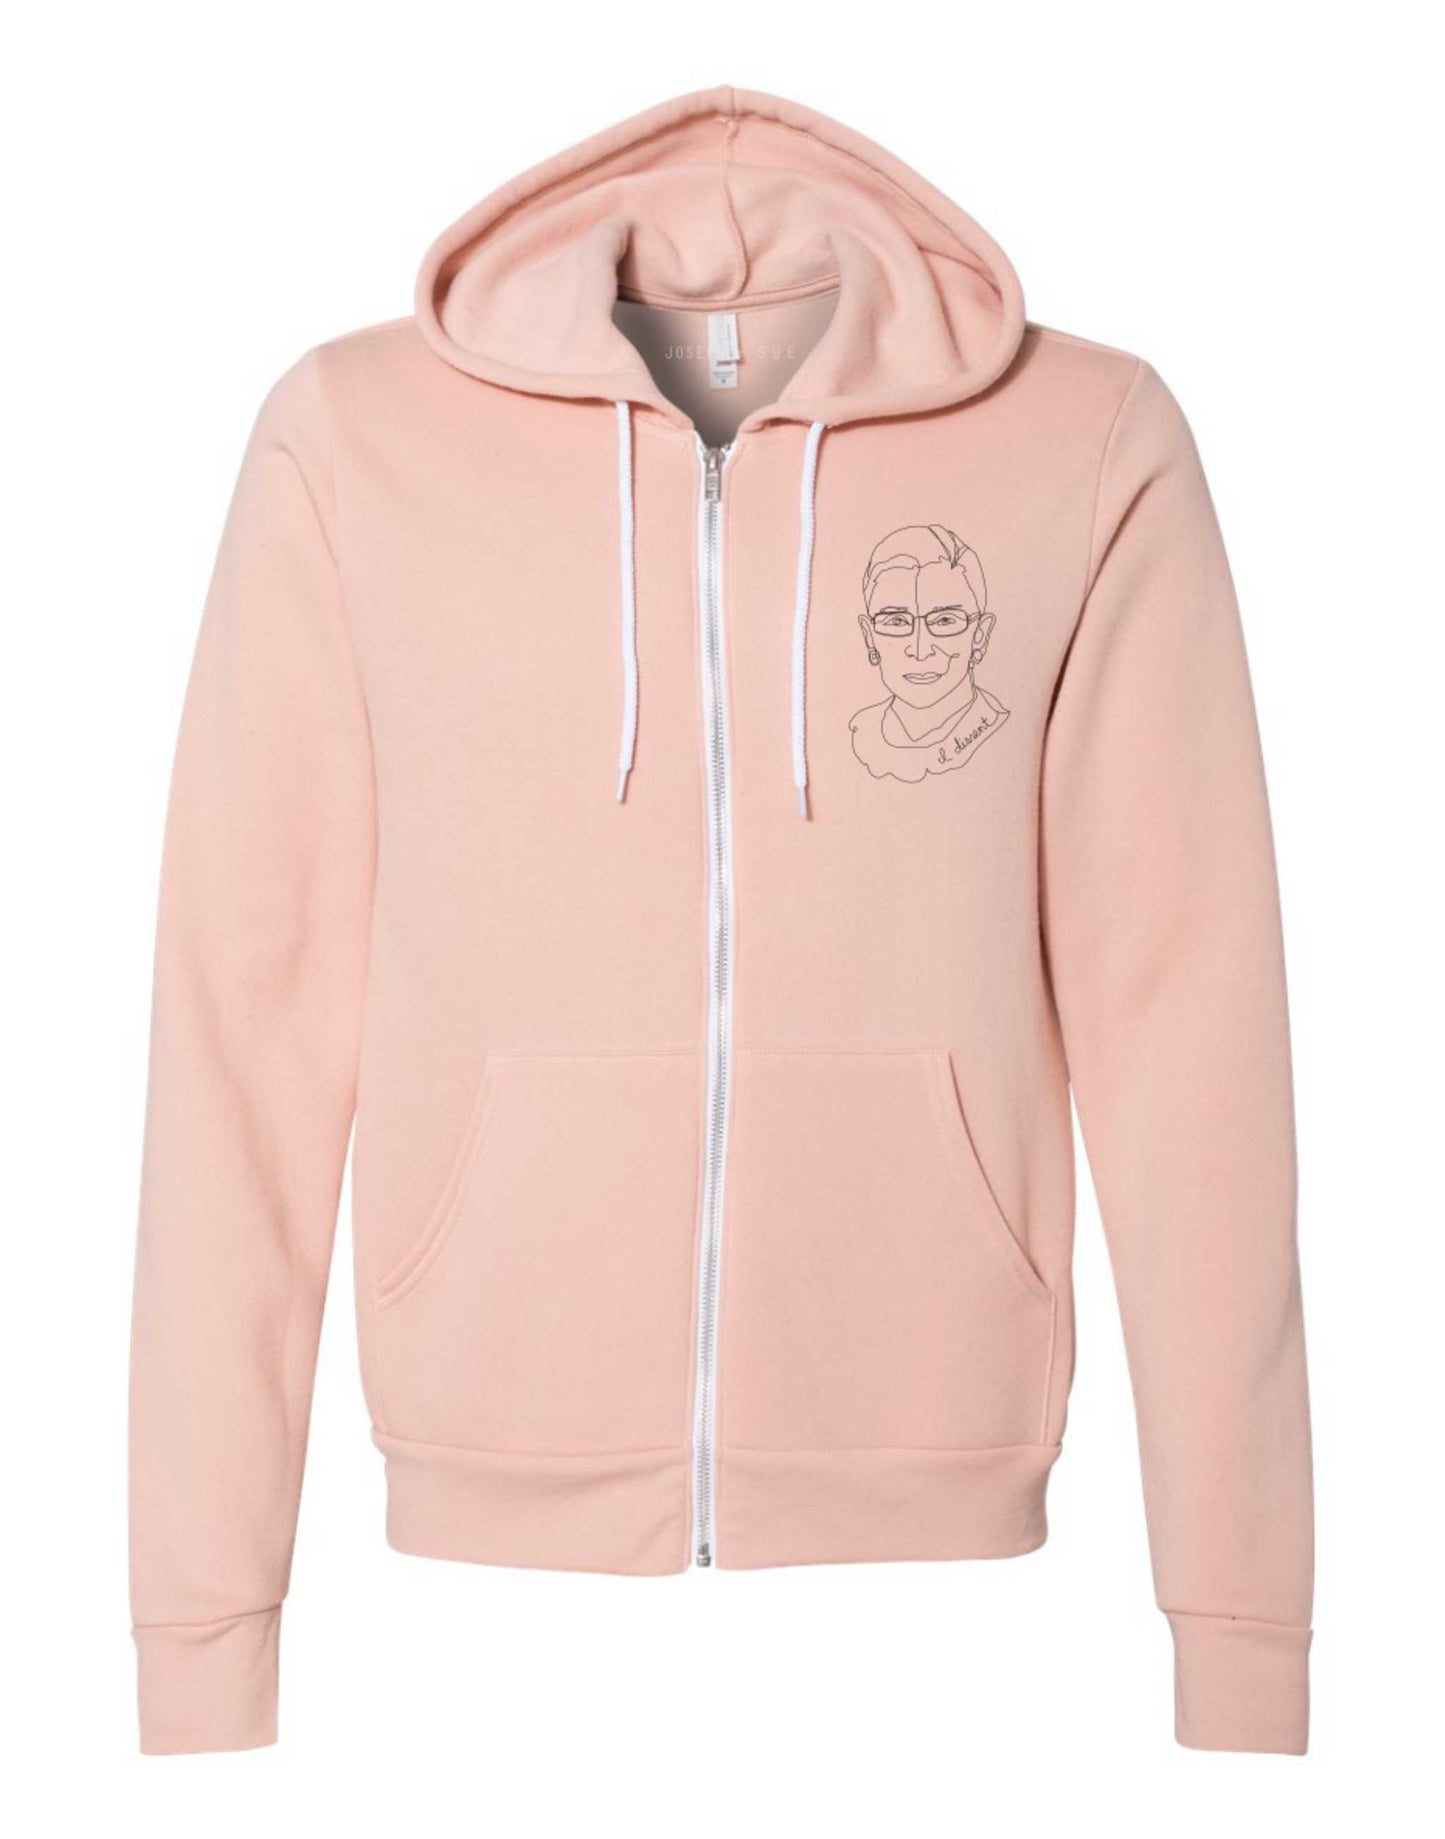 RBG I dissent Zip Hoodie Sweater - Two Options